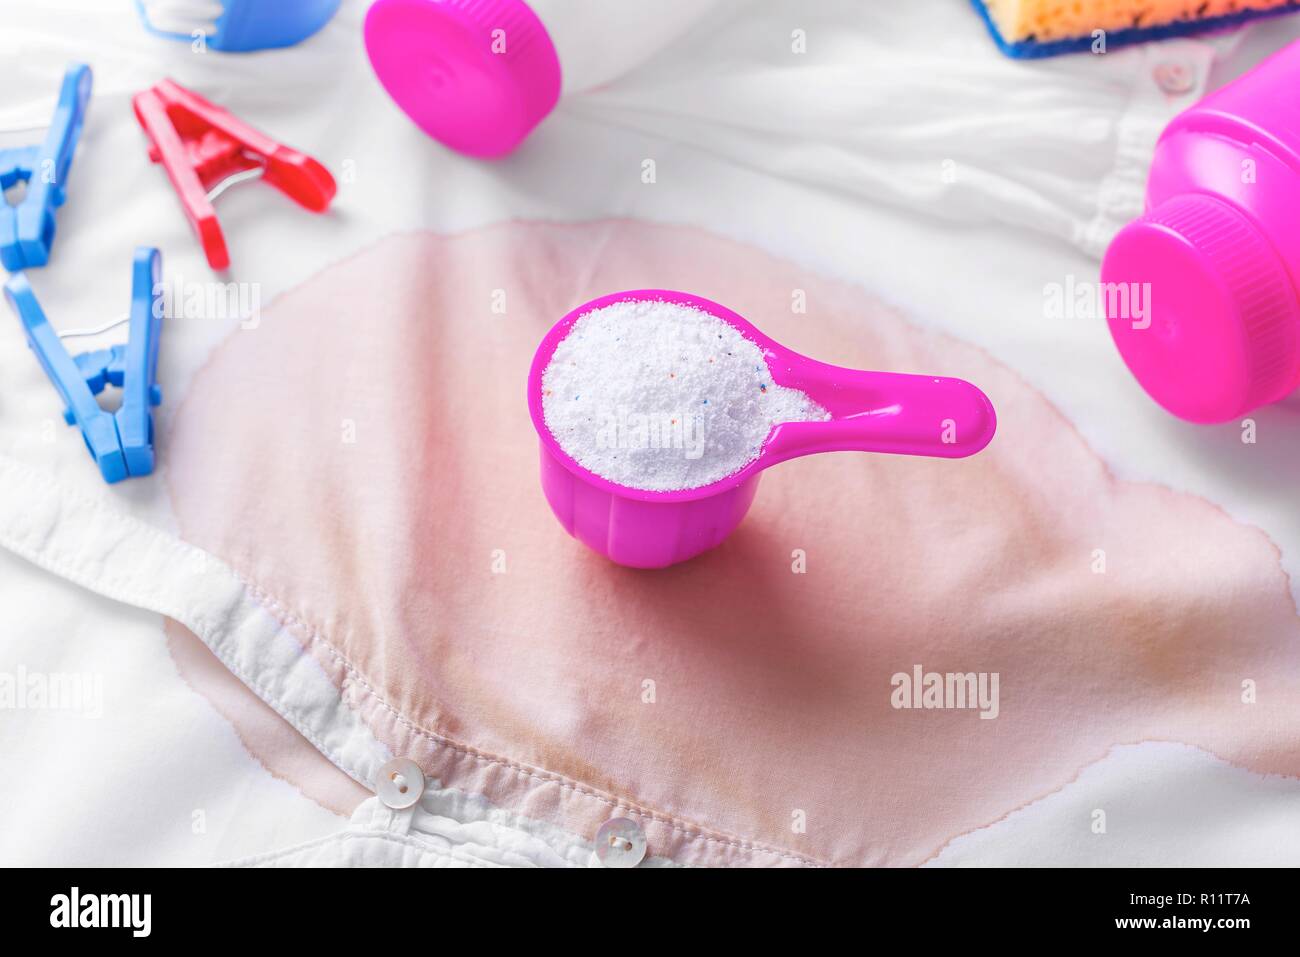 Stain on clothes. Stain removers and other cleaning supplies. Stock Photo